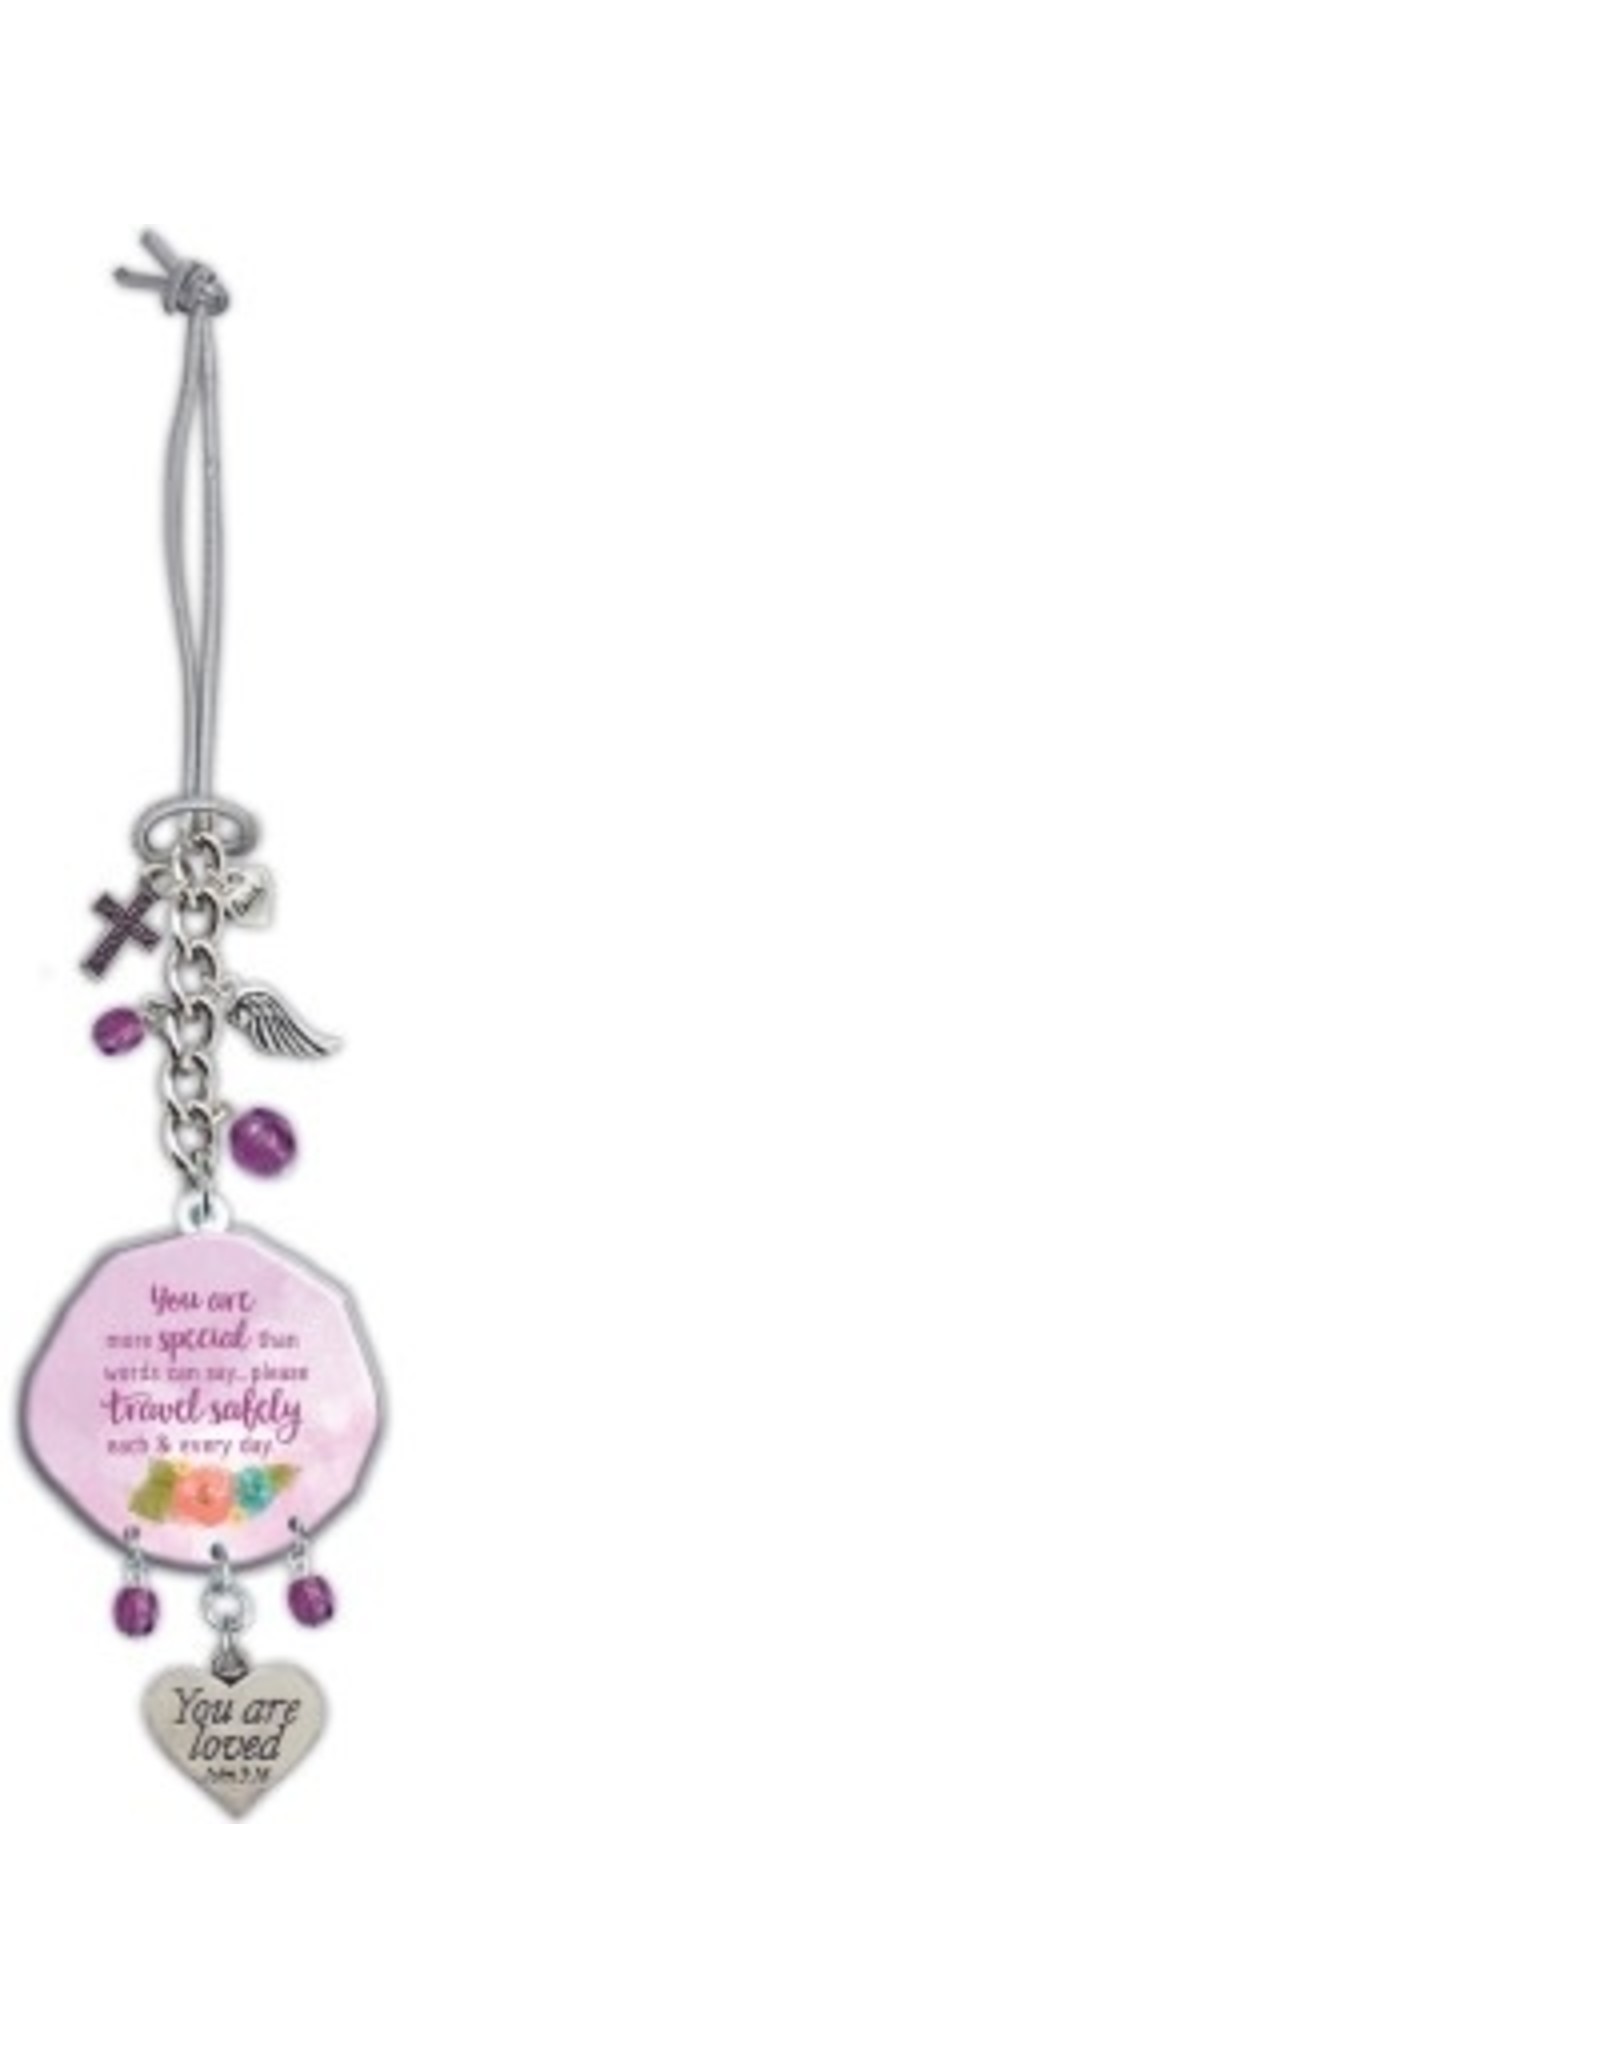 Abbey & CA Gift Car Charm - You are More Special